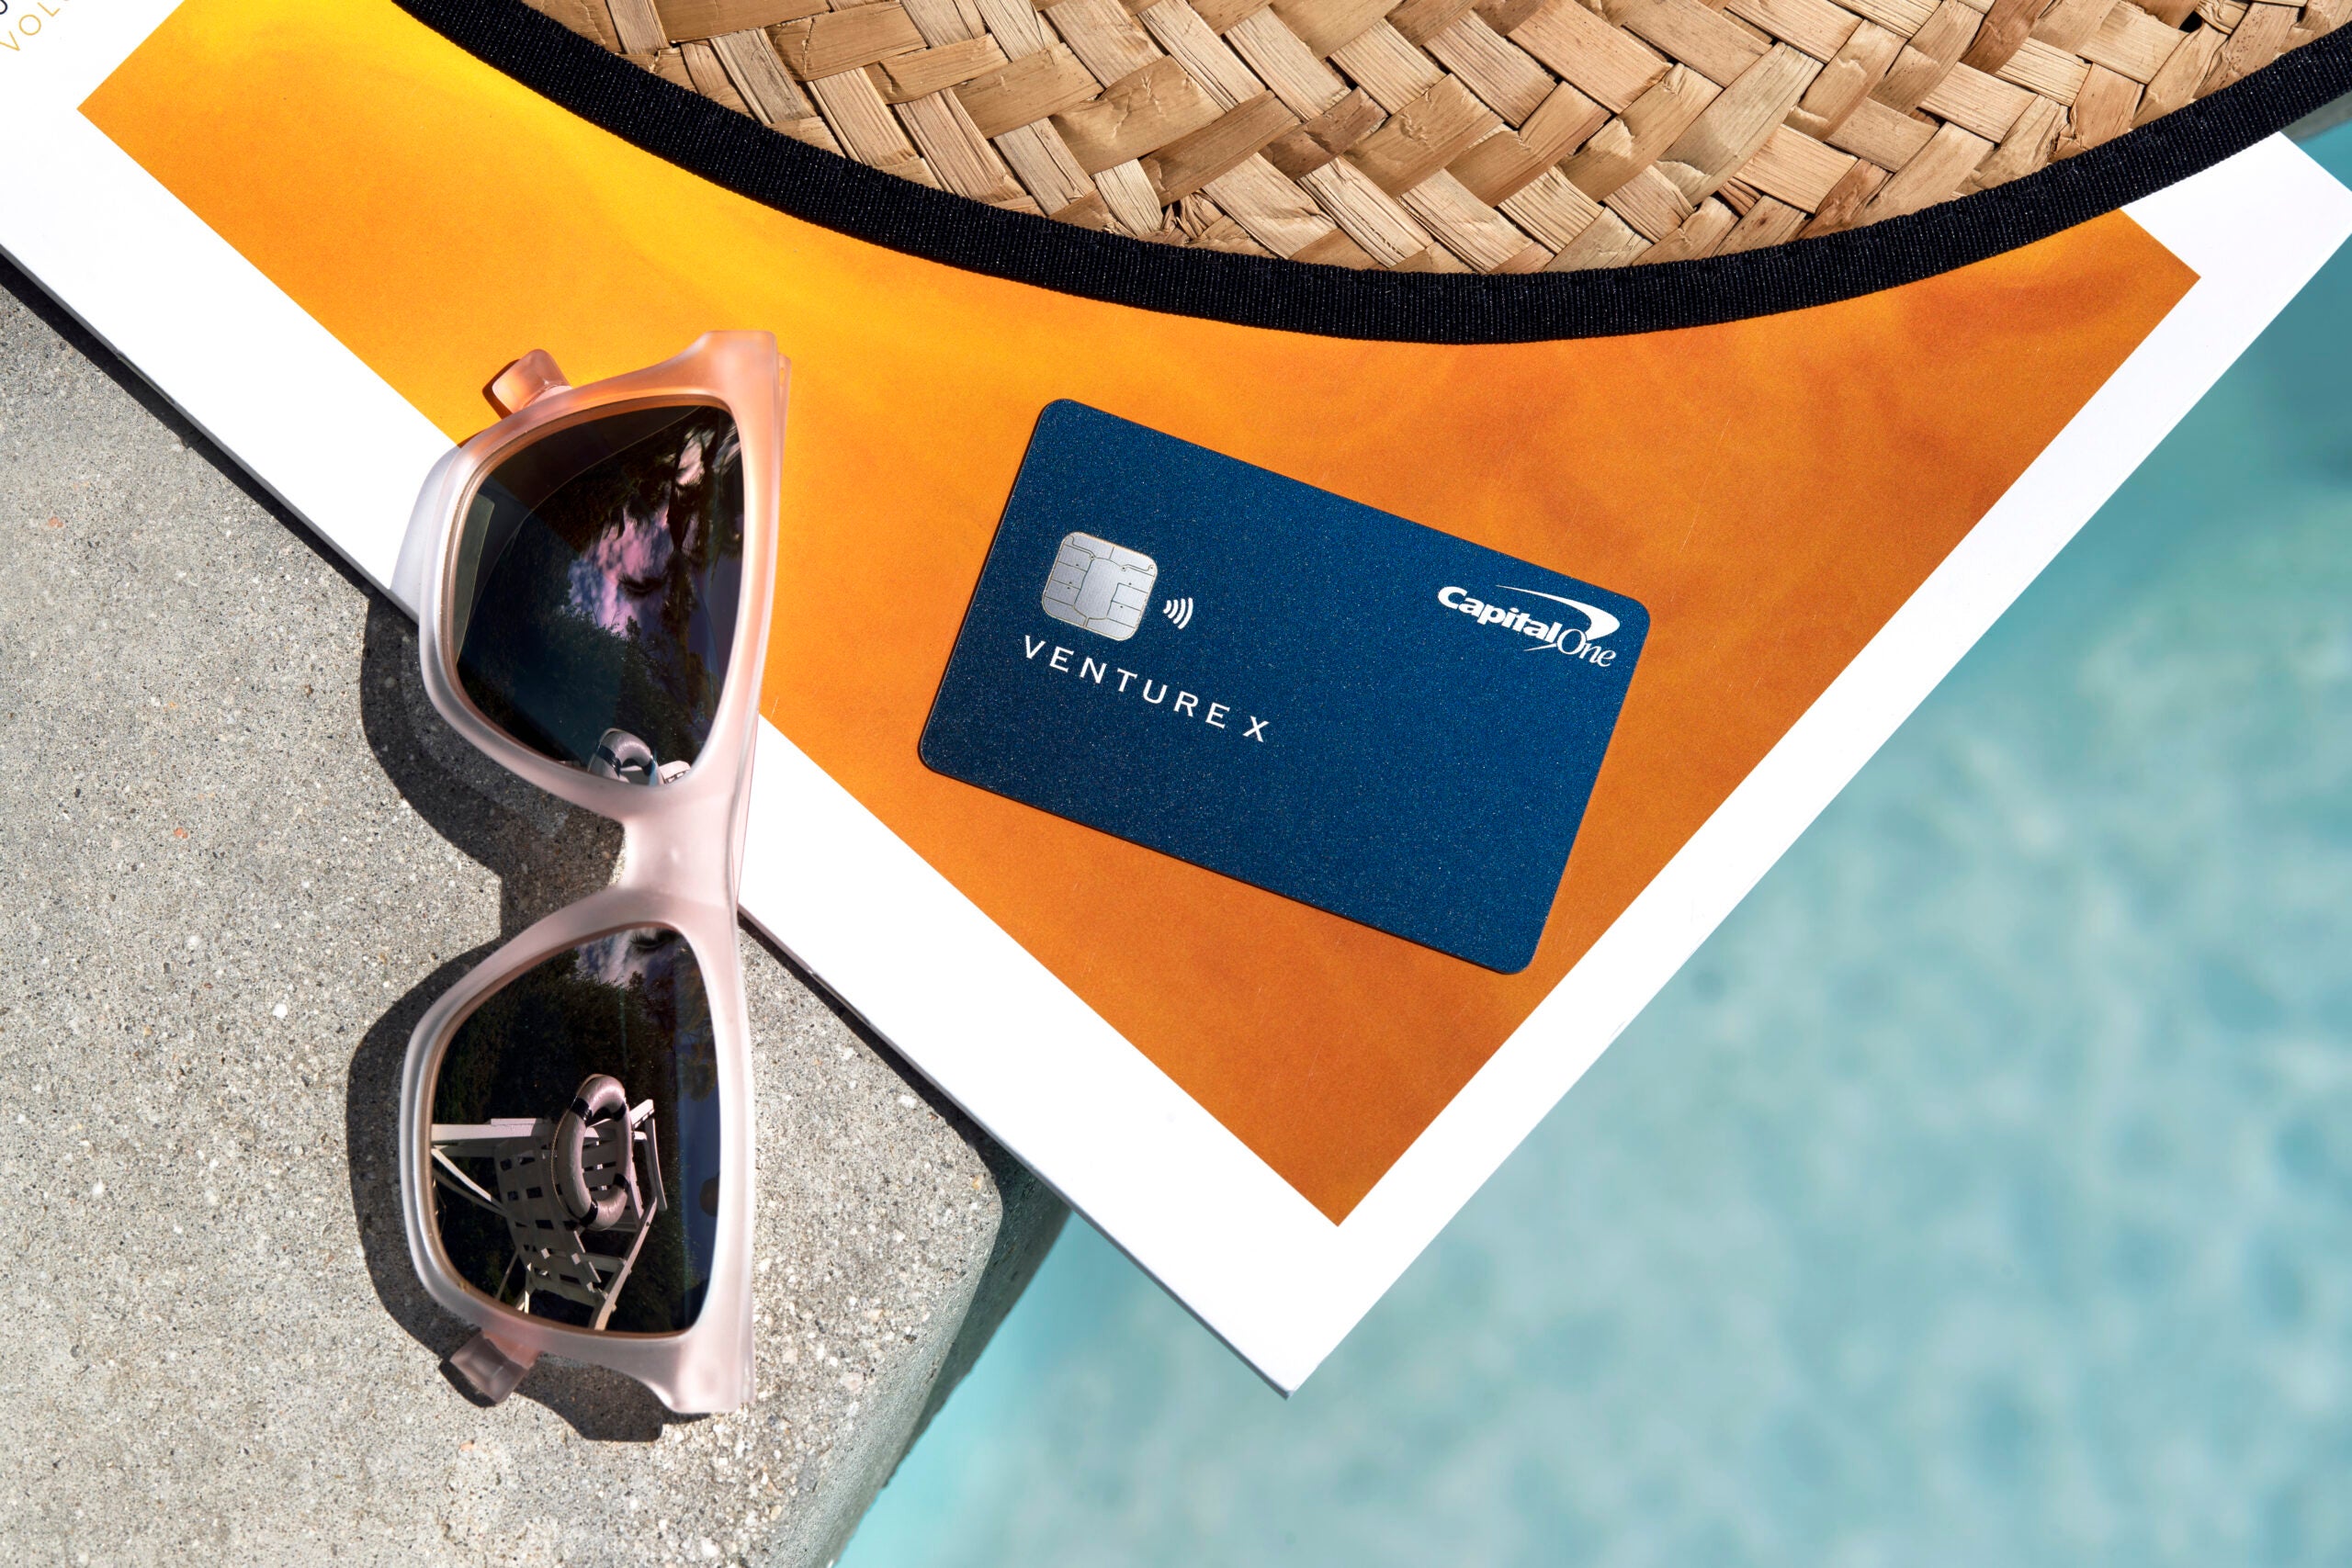 Applications are now open for Capital One's first-ever premium travel credit card, Venture X